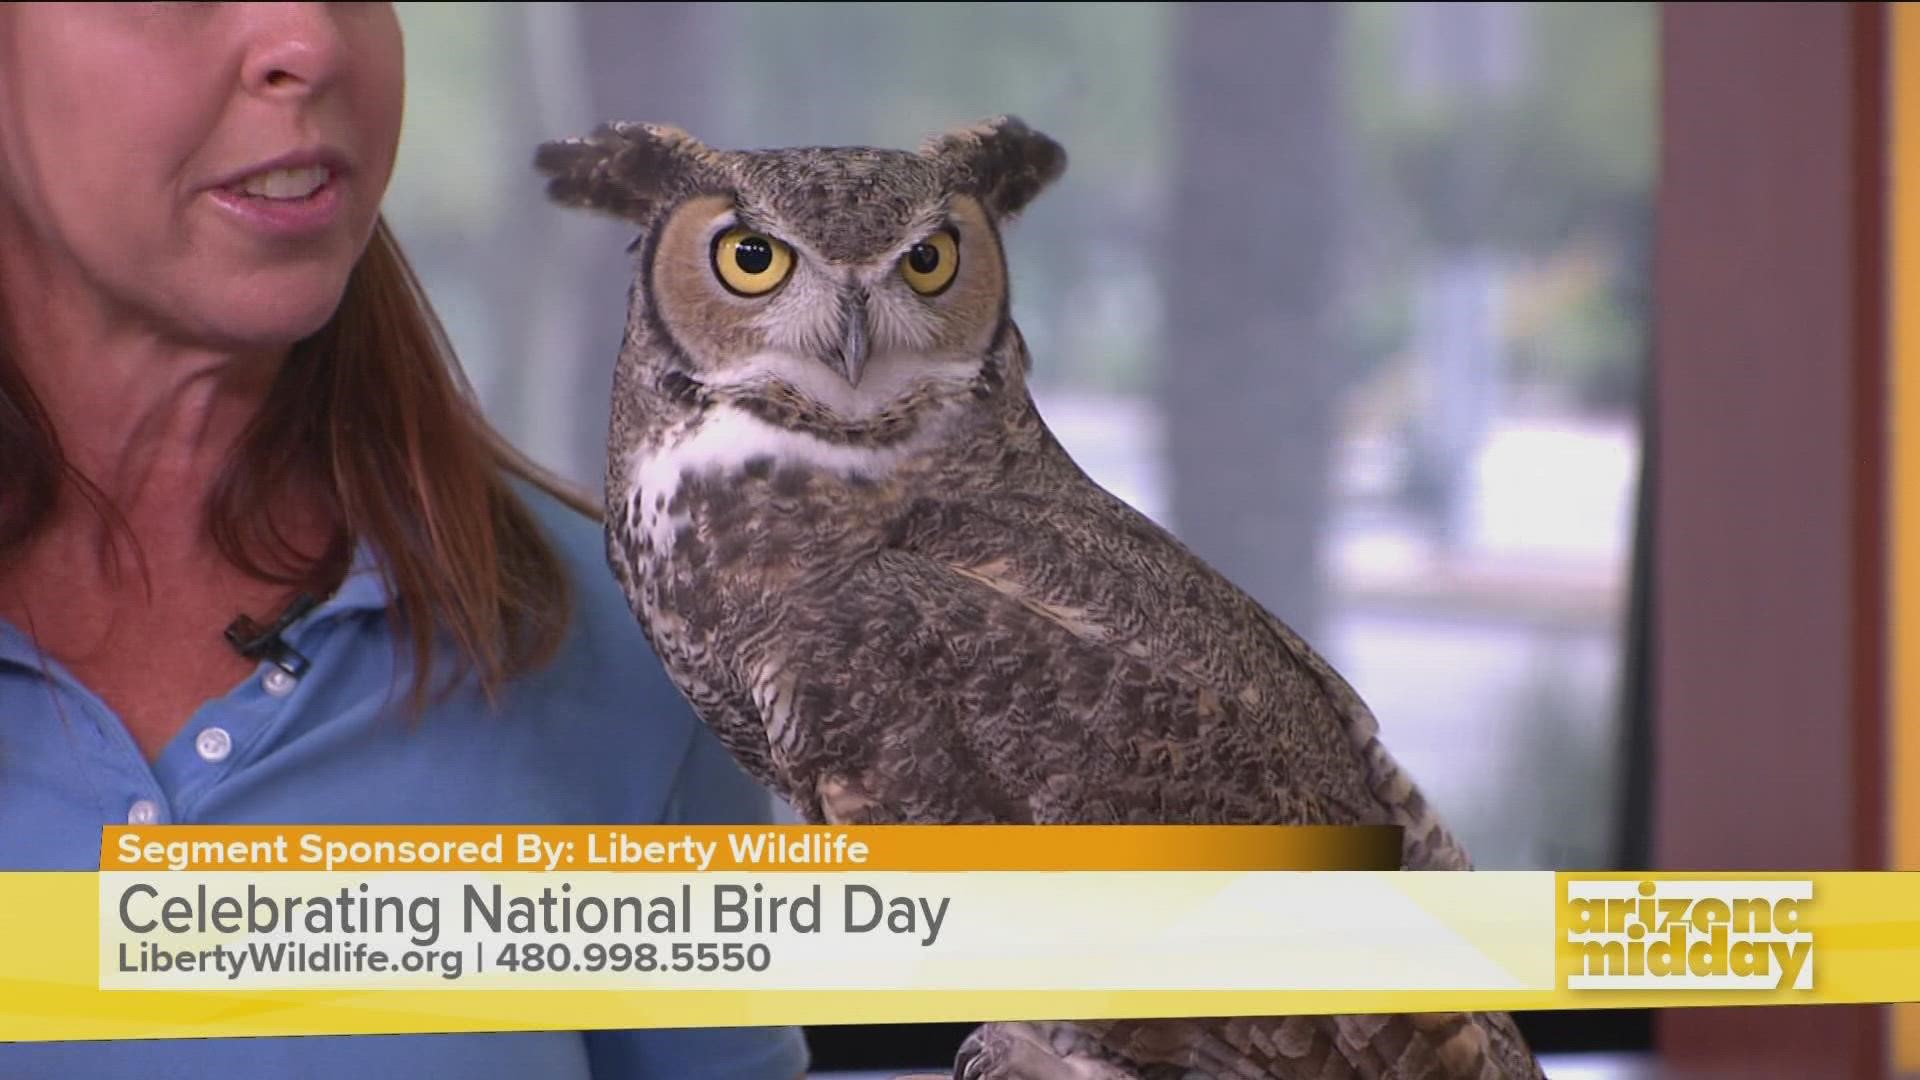 Laura Hackett with Liberty Wildlife stopped by with a rescued owl and hawk to help share more about National Bird Day.